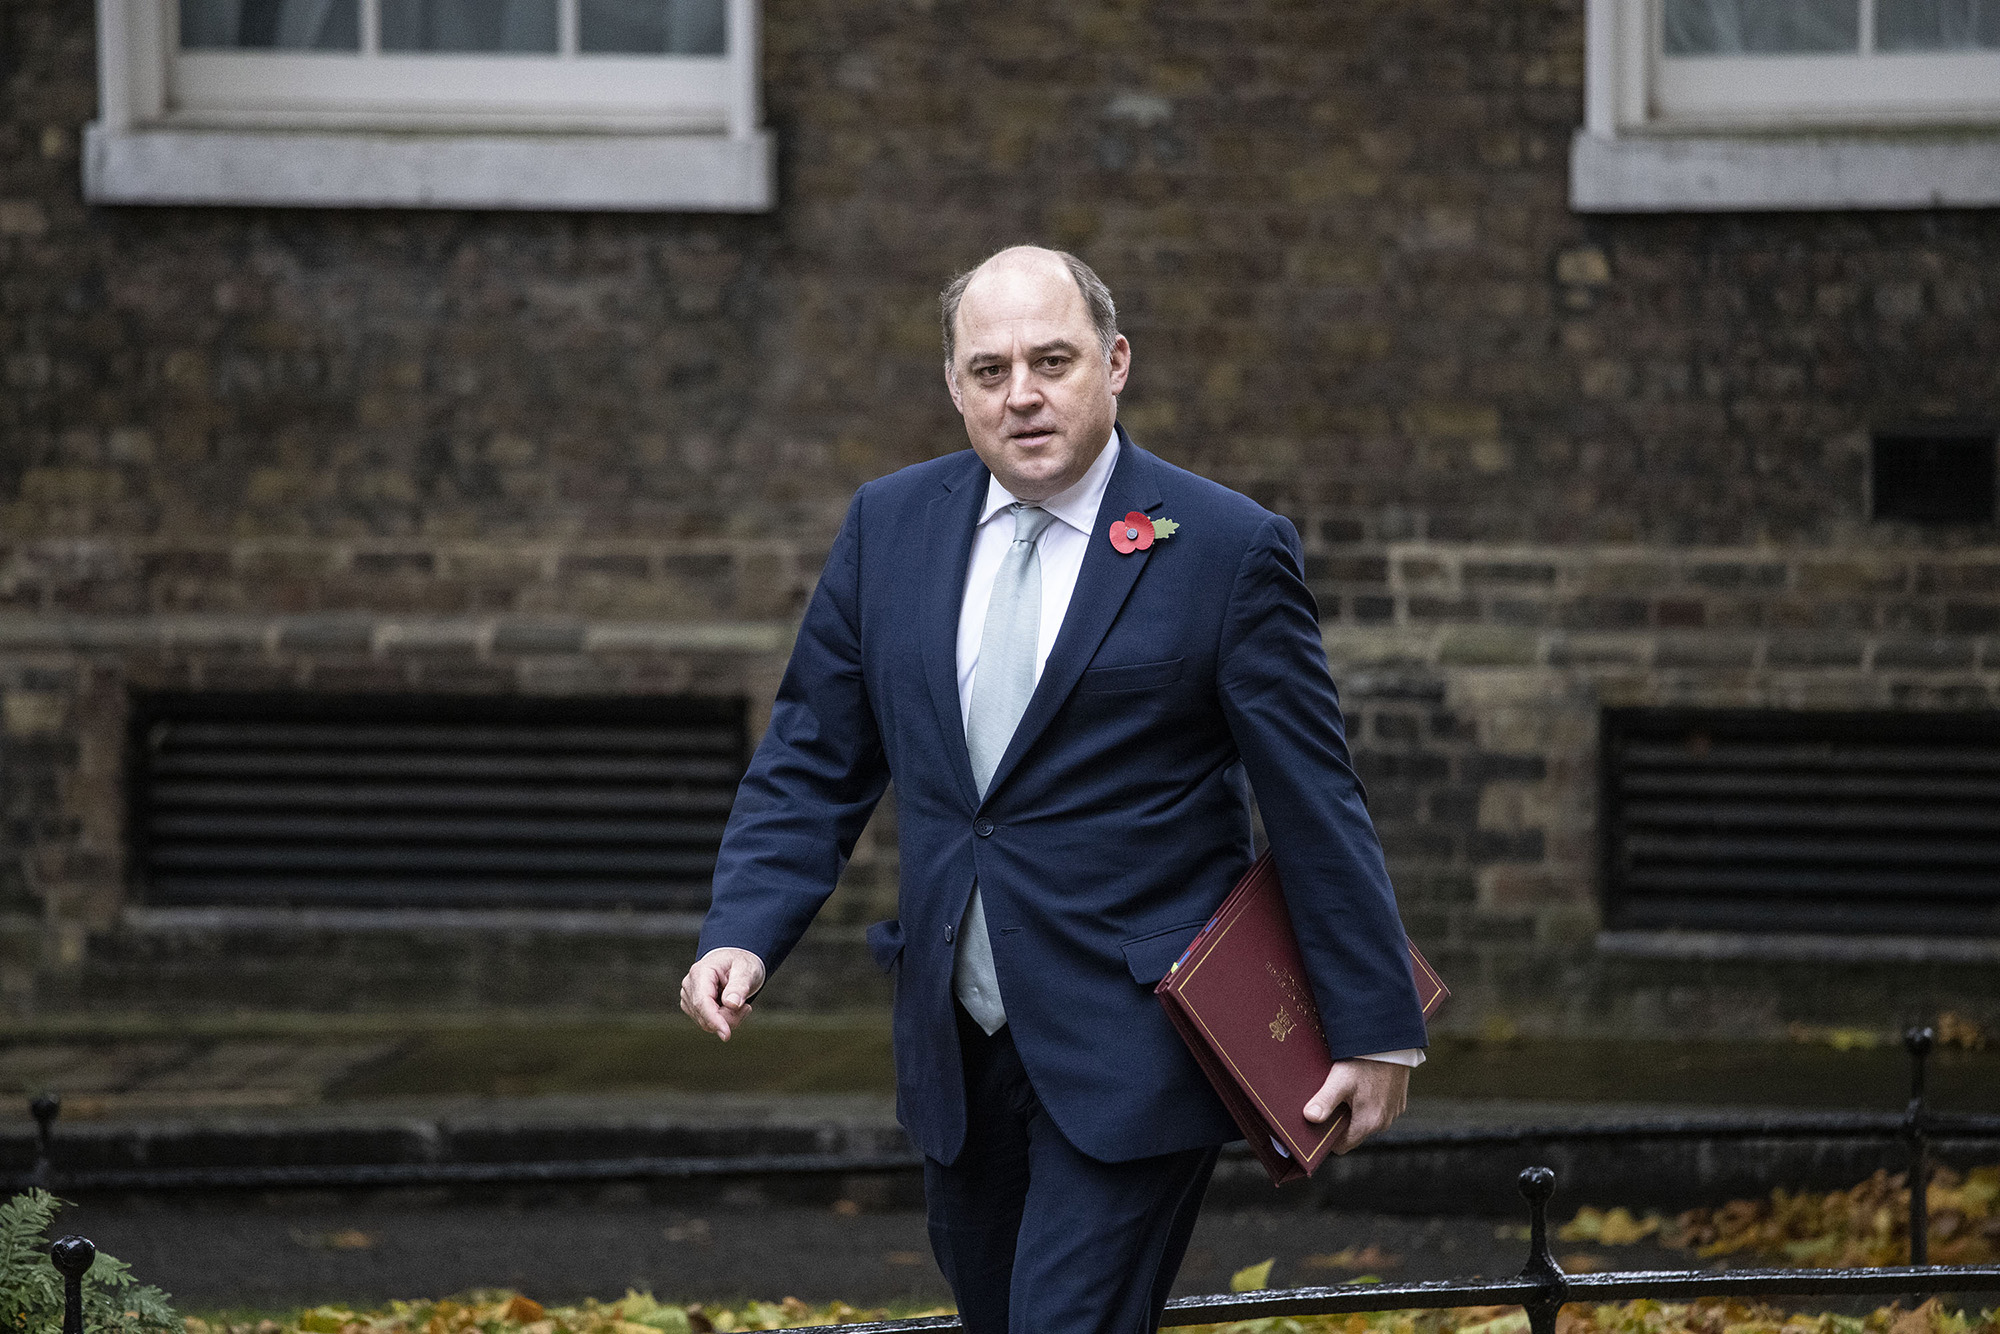 UK Secretary of State for Defence Ben Wallace arrives in Downing Street, London, on November 1.